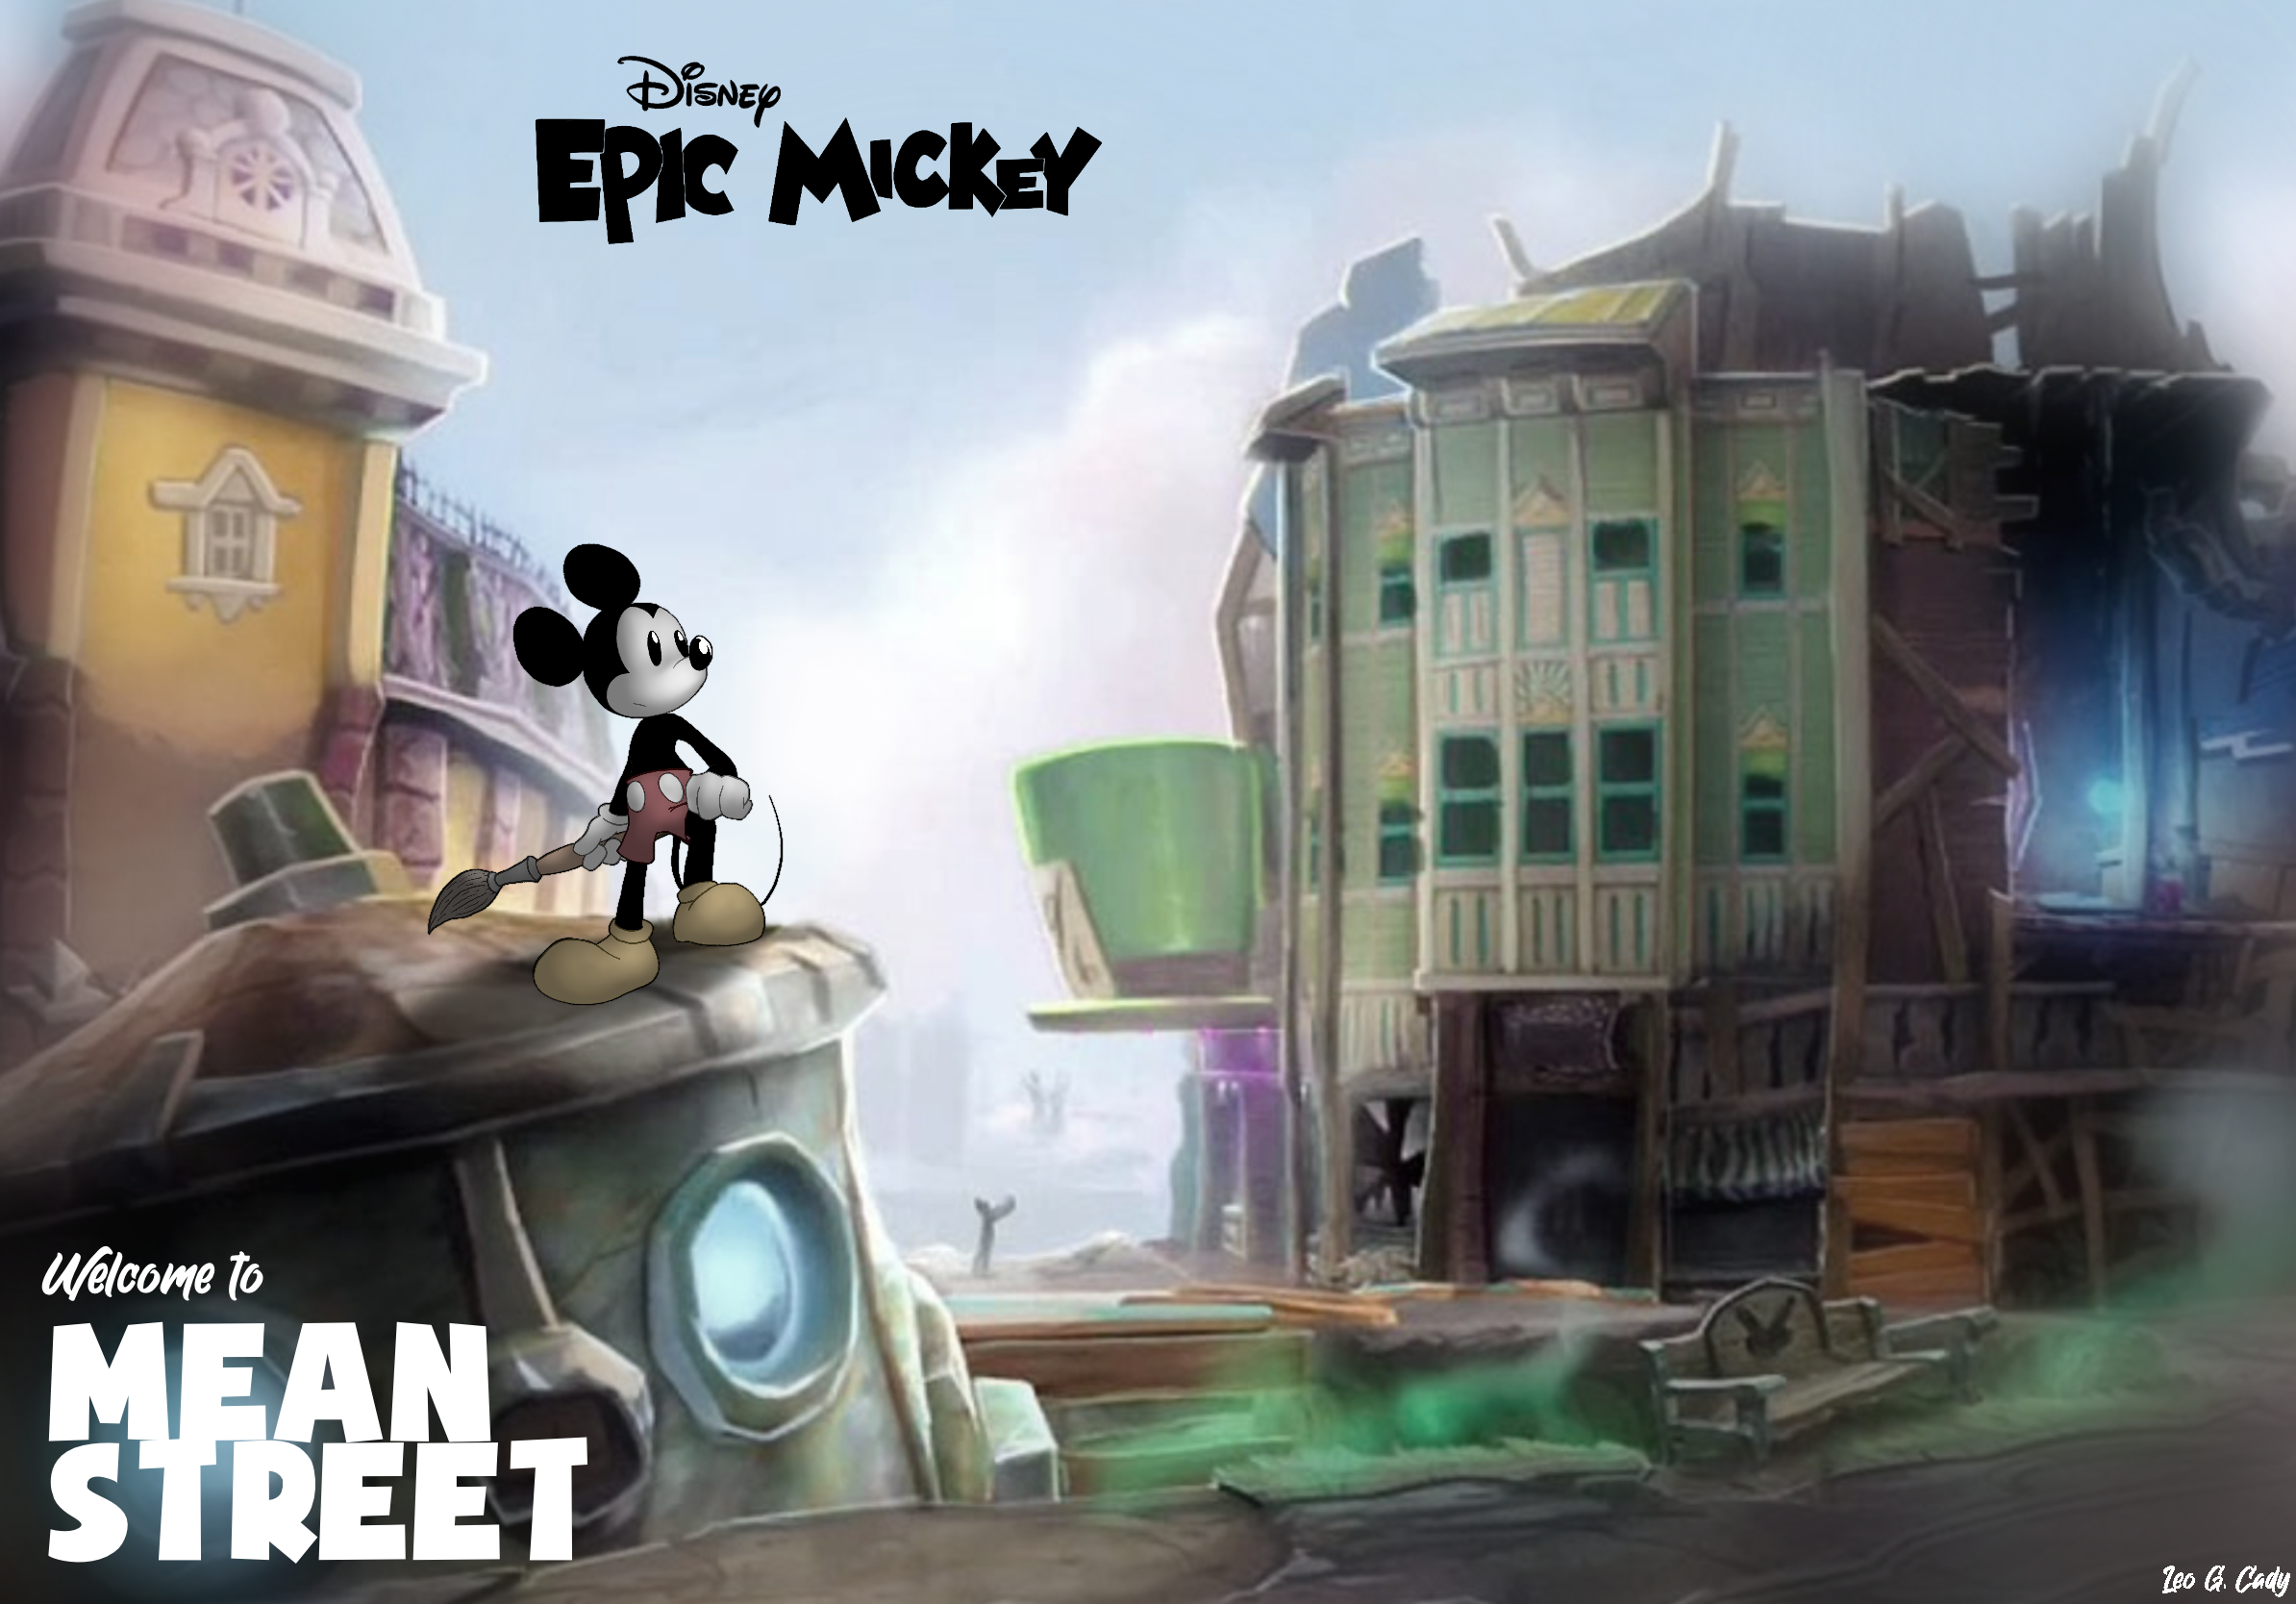 Welcome to Mean Street by LeoGCady on DeviantArt